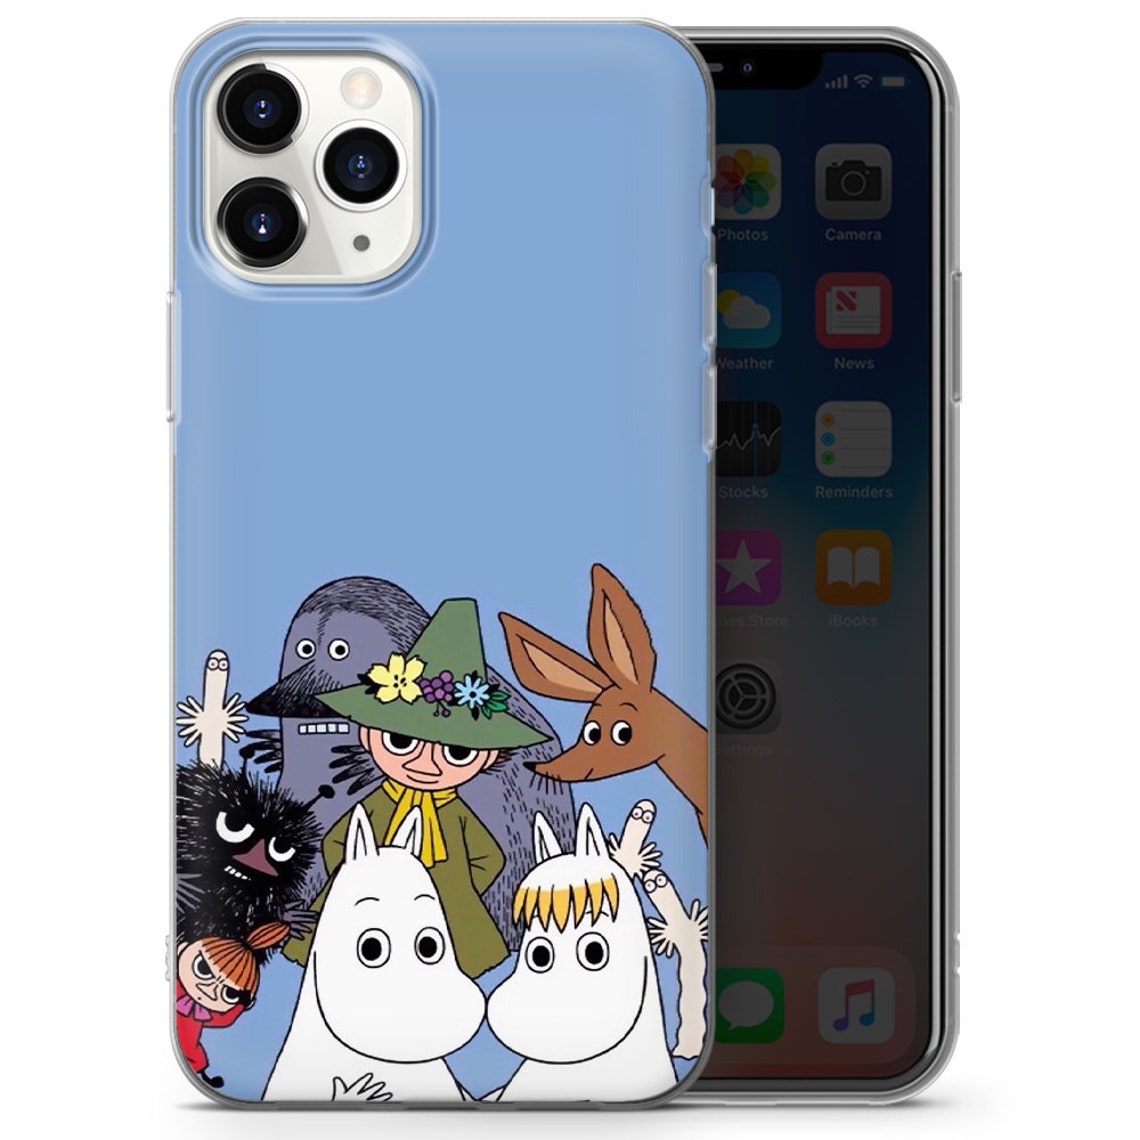 Moomin Mumintroll Phone Case Cover for iPhone 12 12 Pro 12 | Etsy